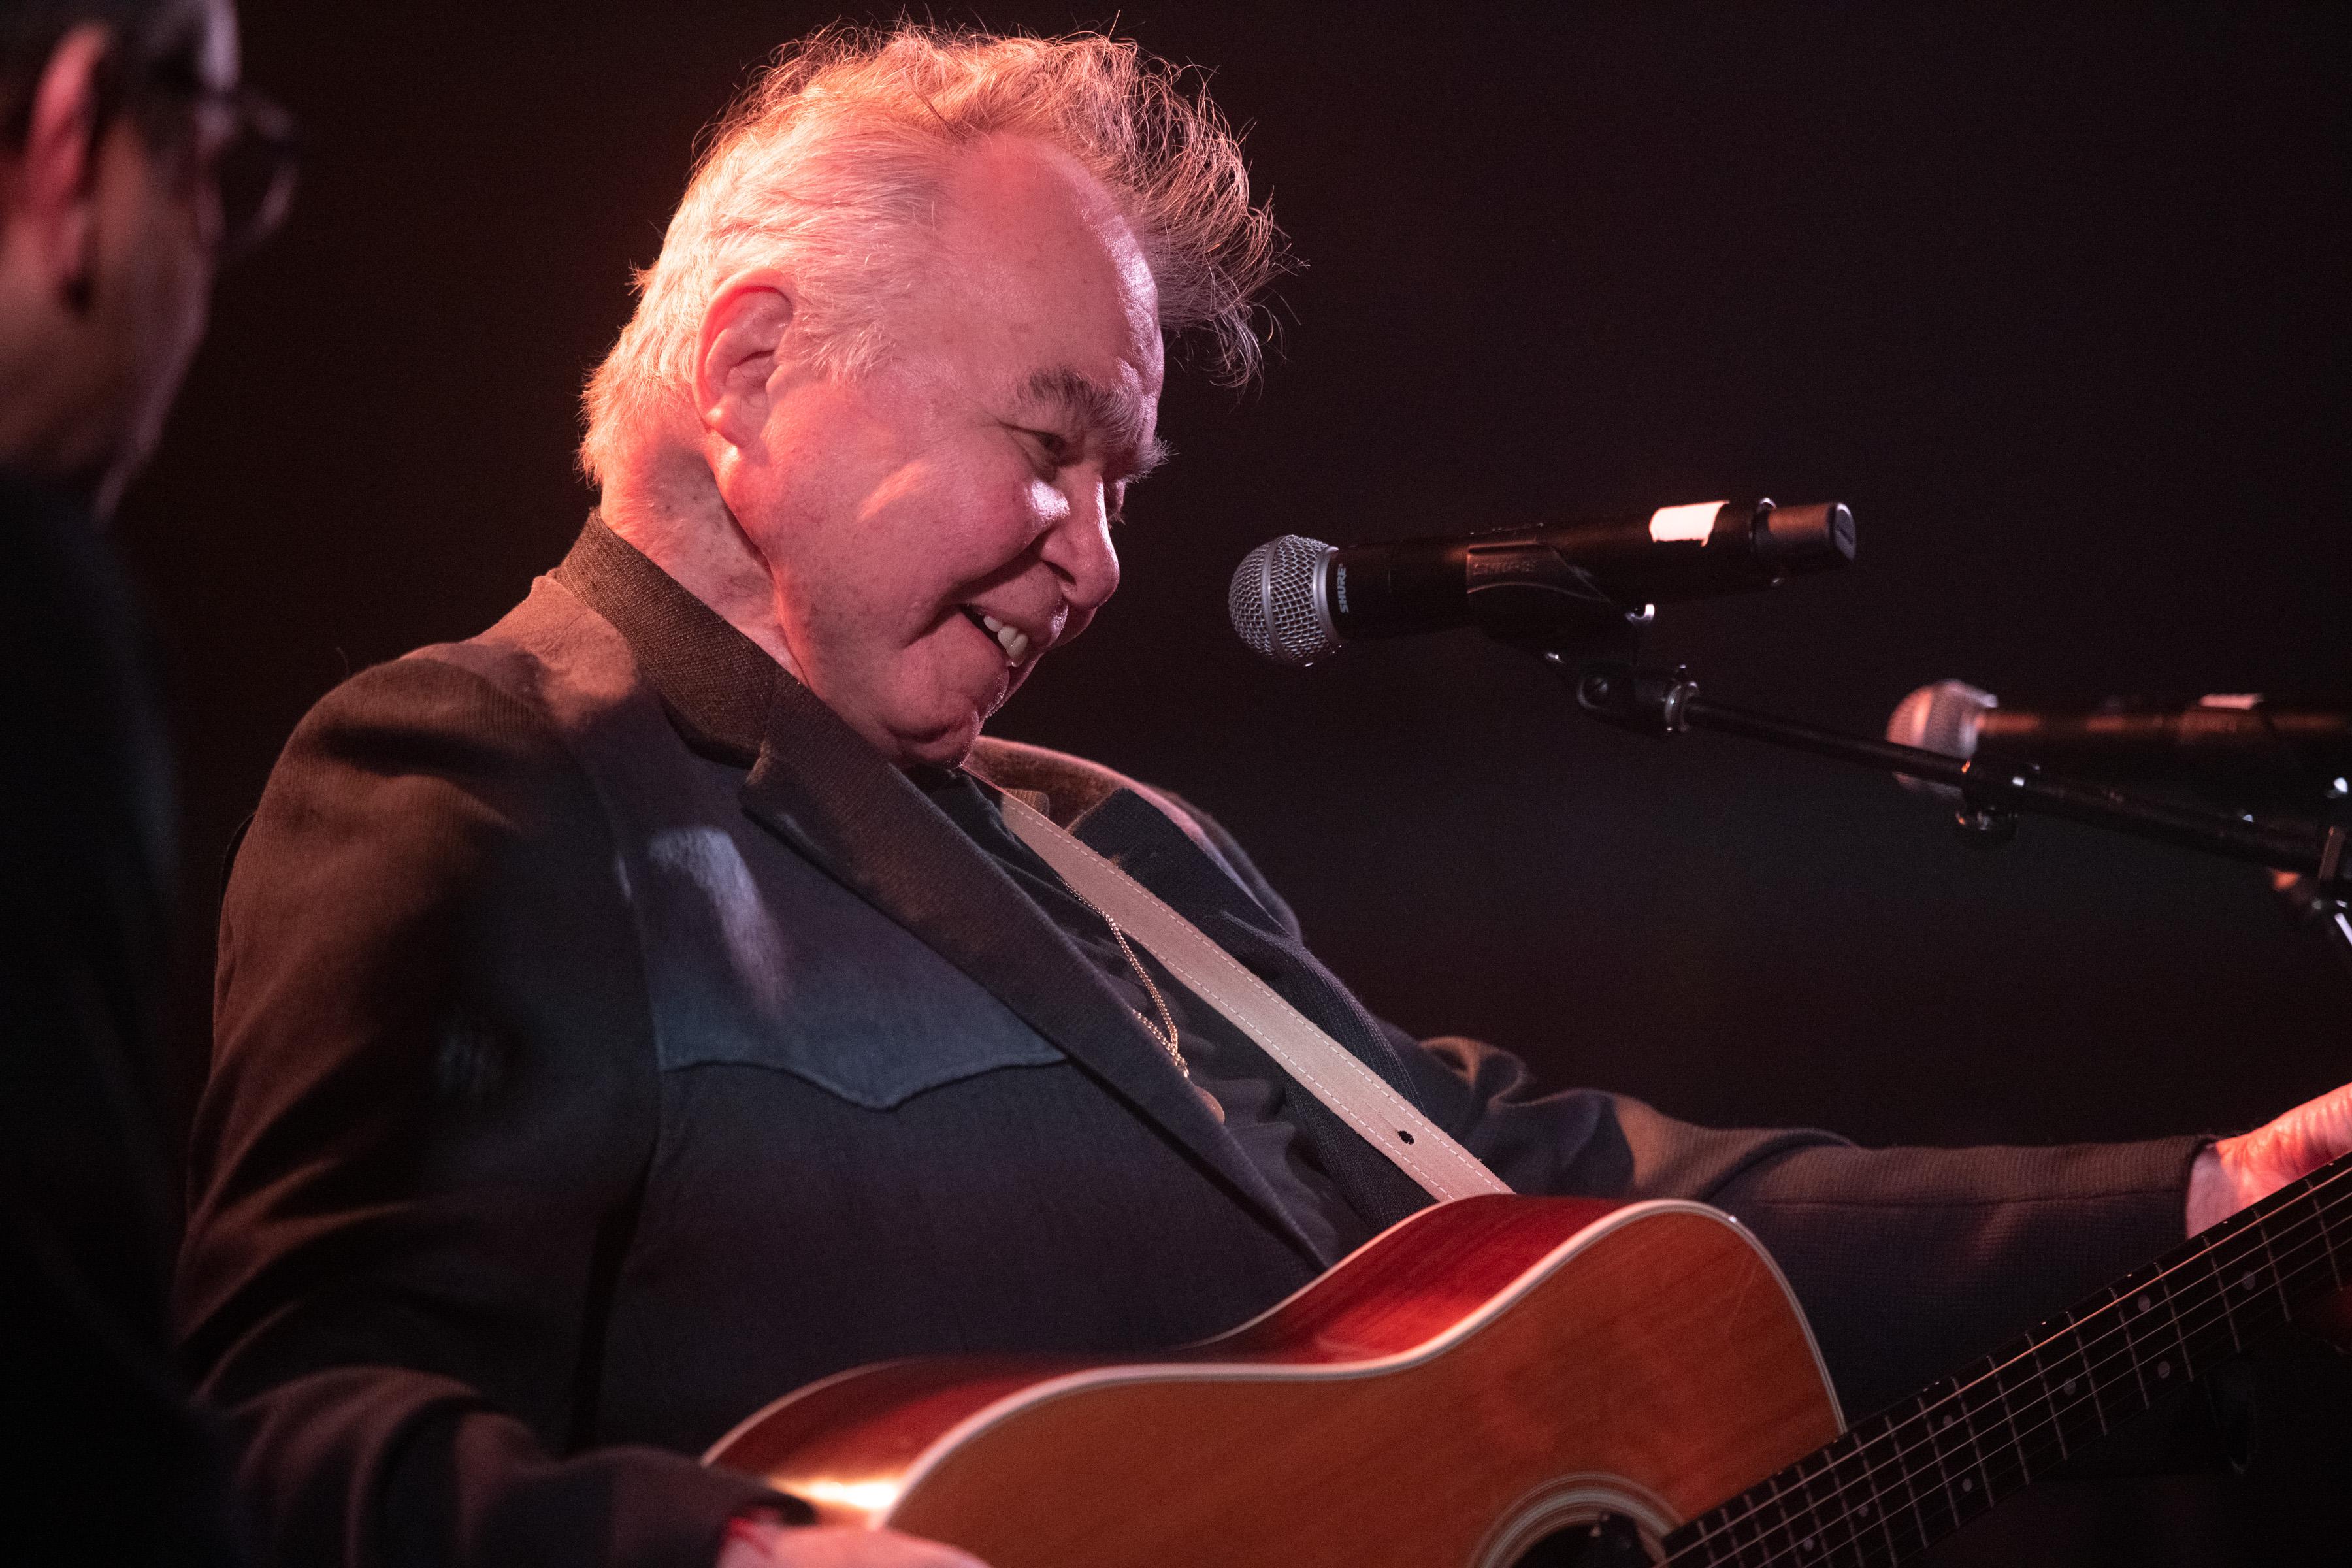 John Prine, smiling, plays an acoustic guitar onstage at the Troubadour.